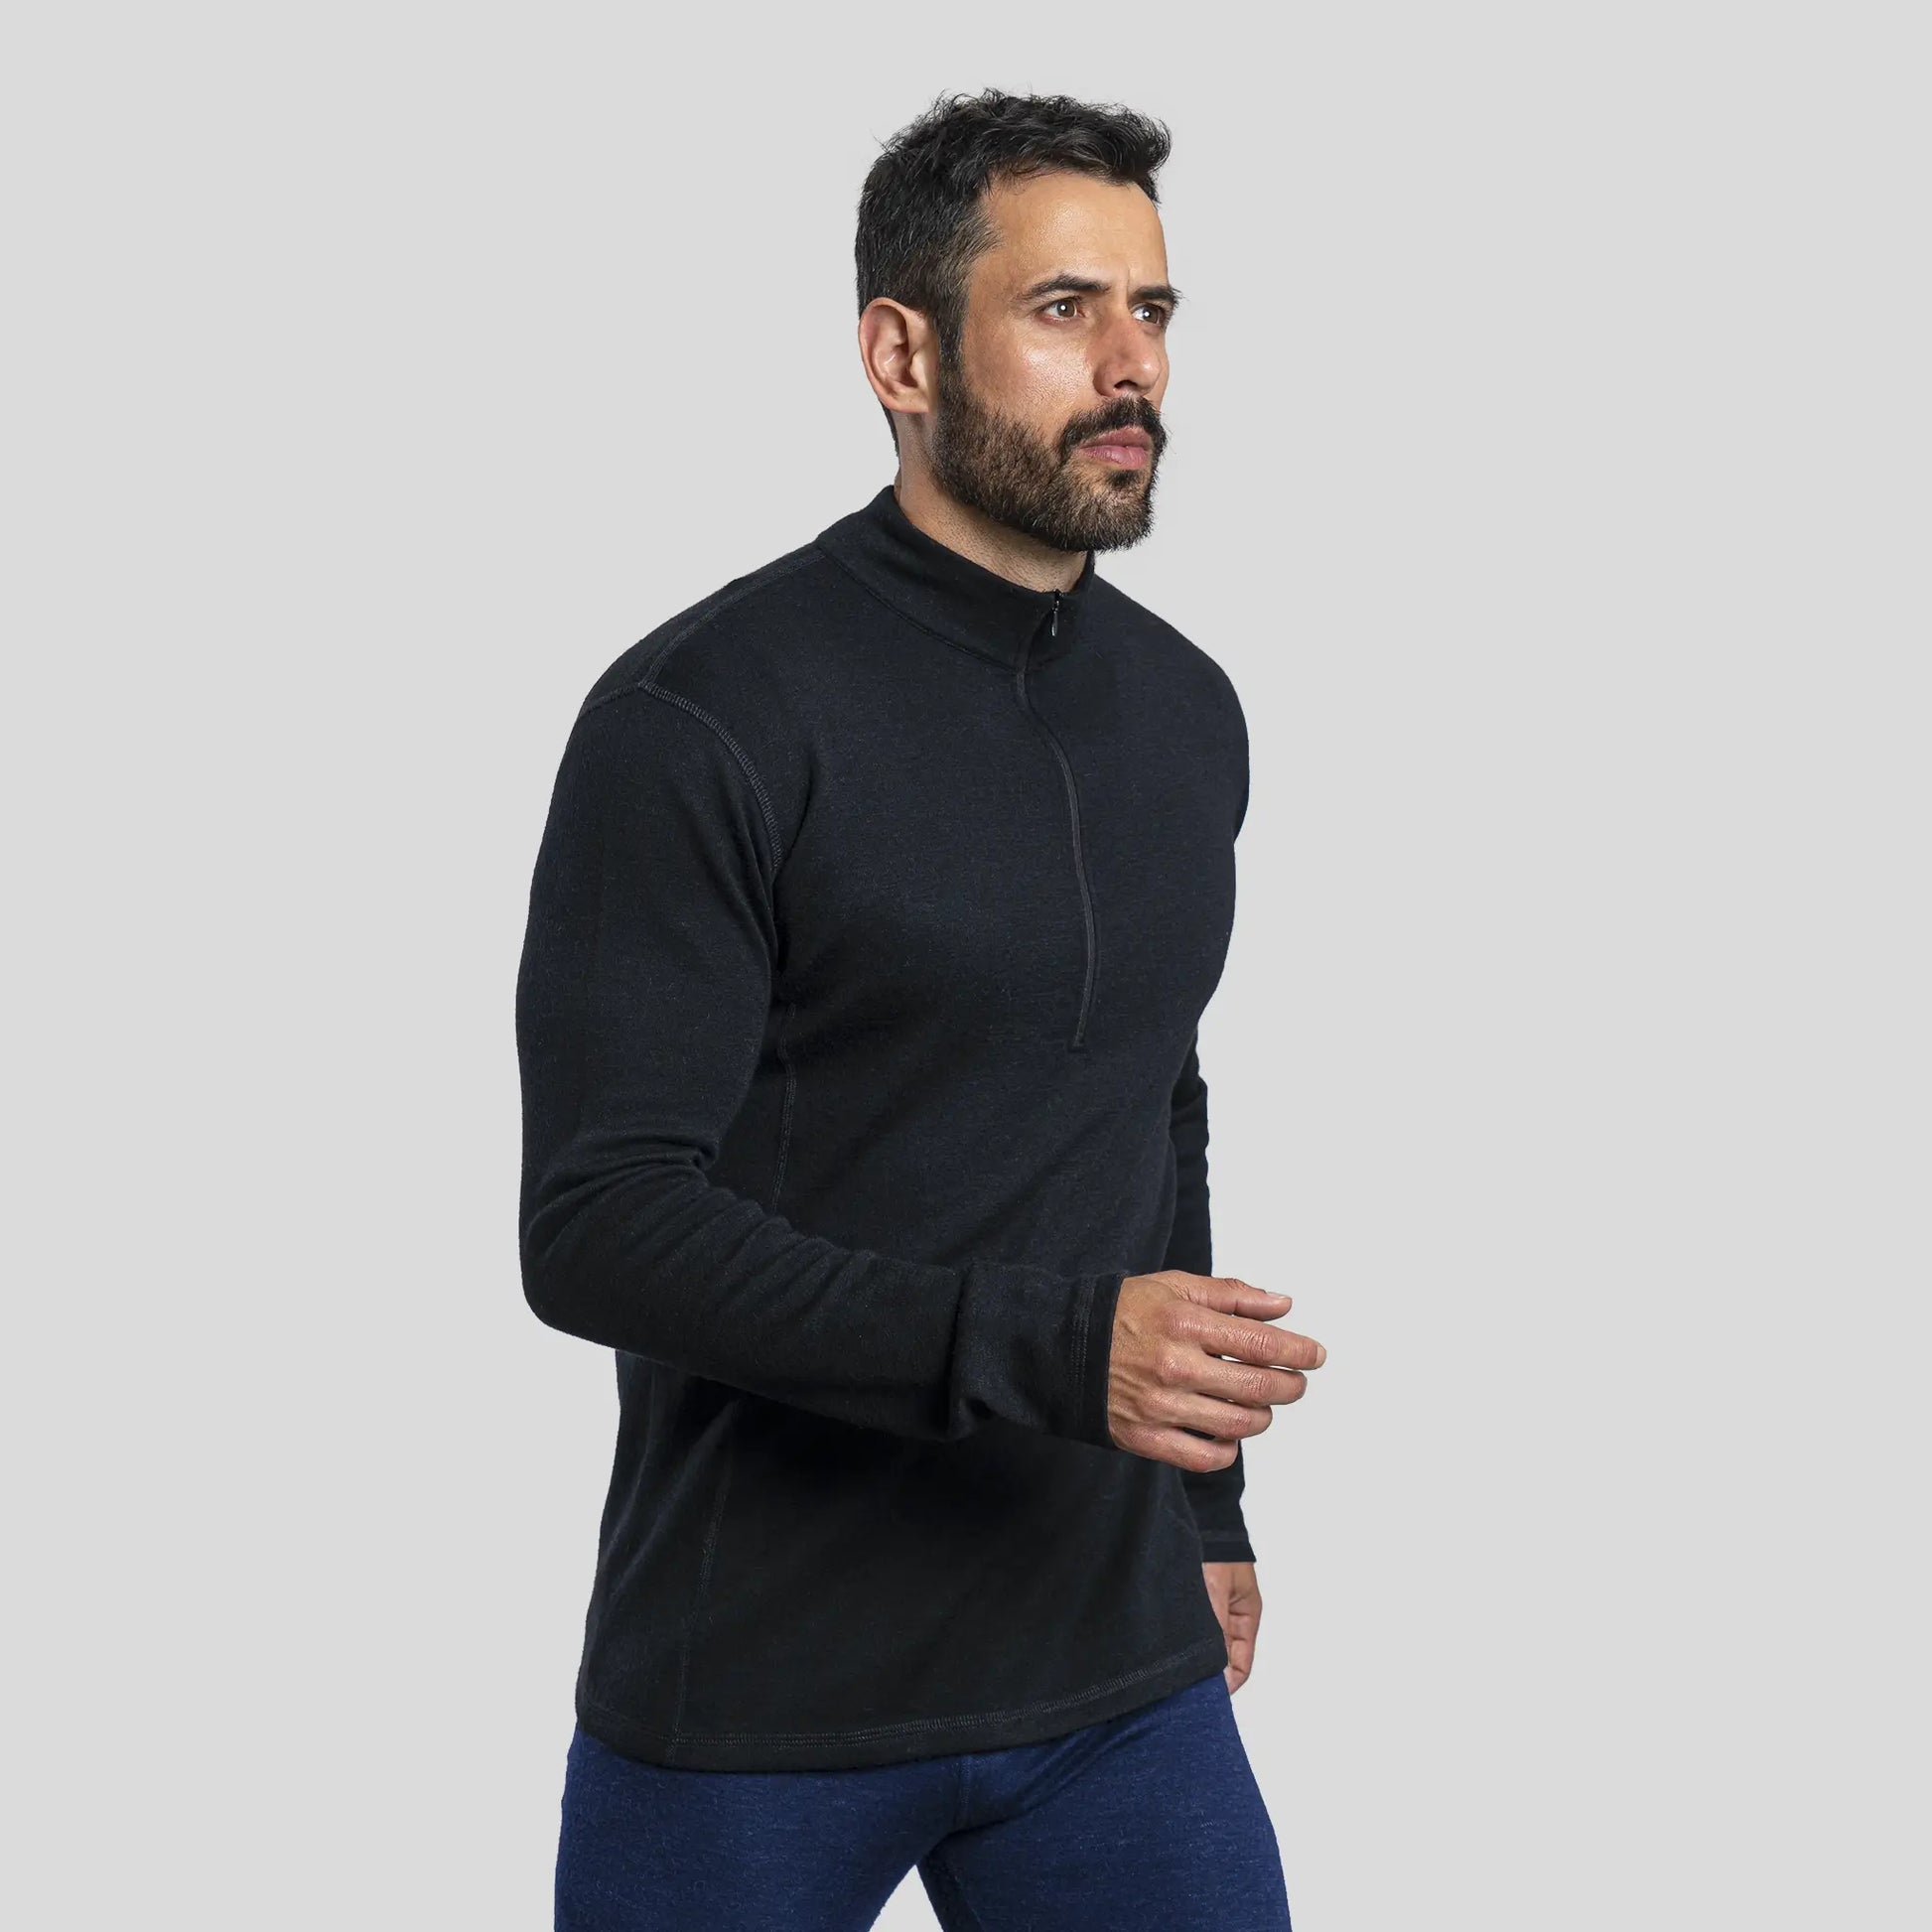 Men’s Alpaca Wool Base Layer: 230 Lightweight | Arms of Andes